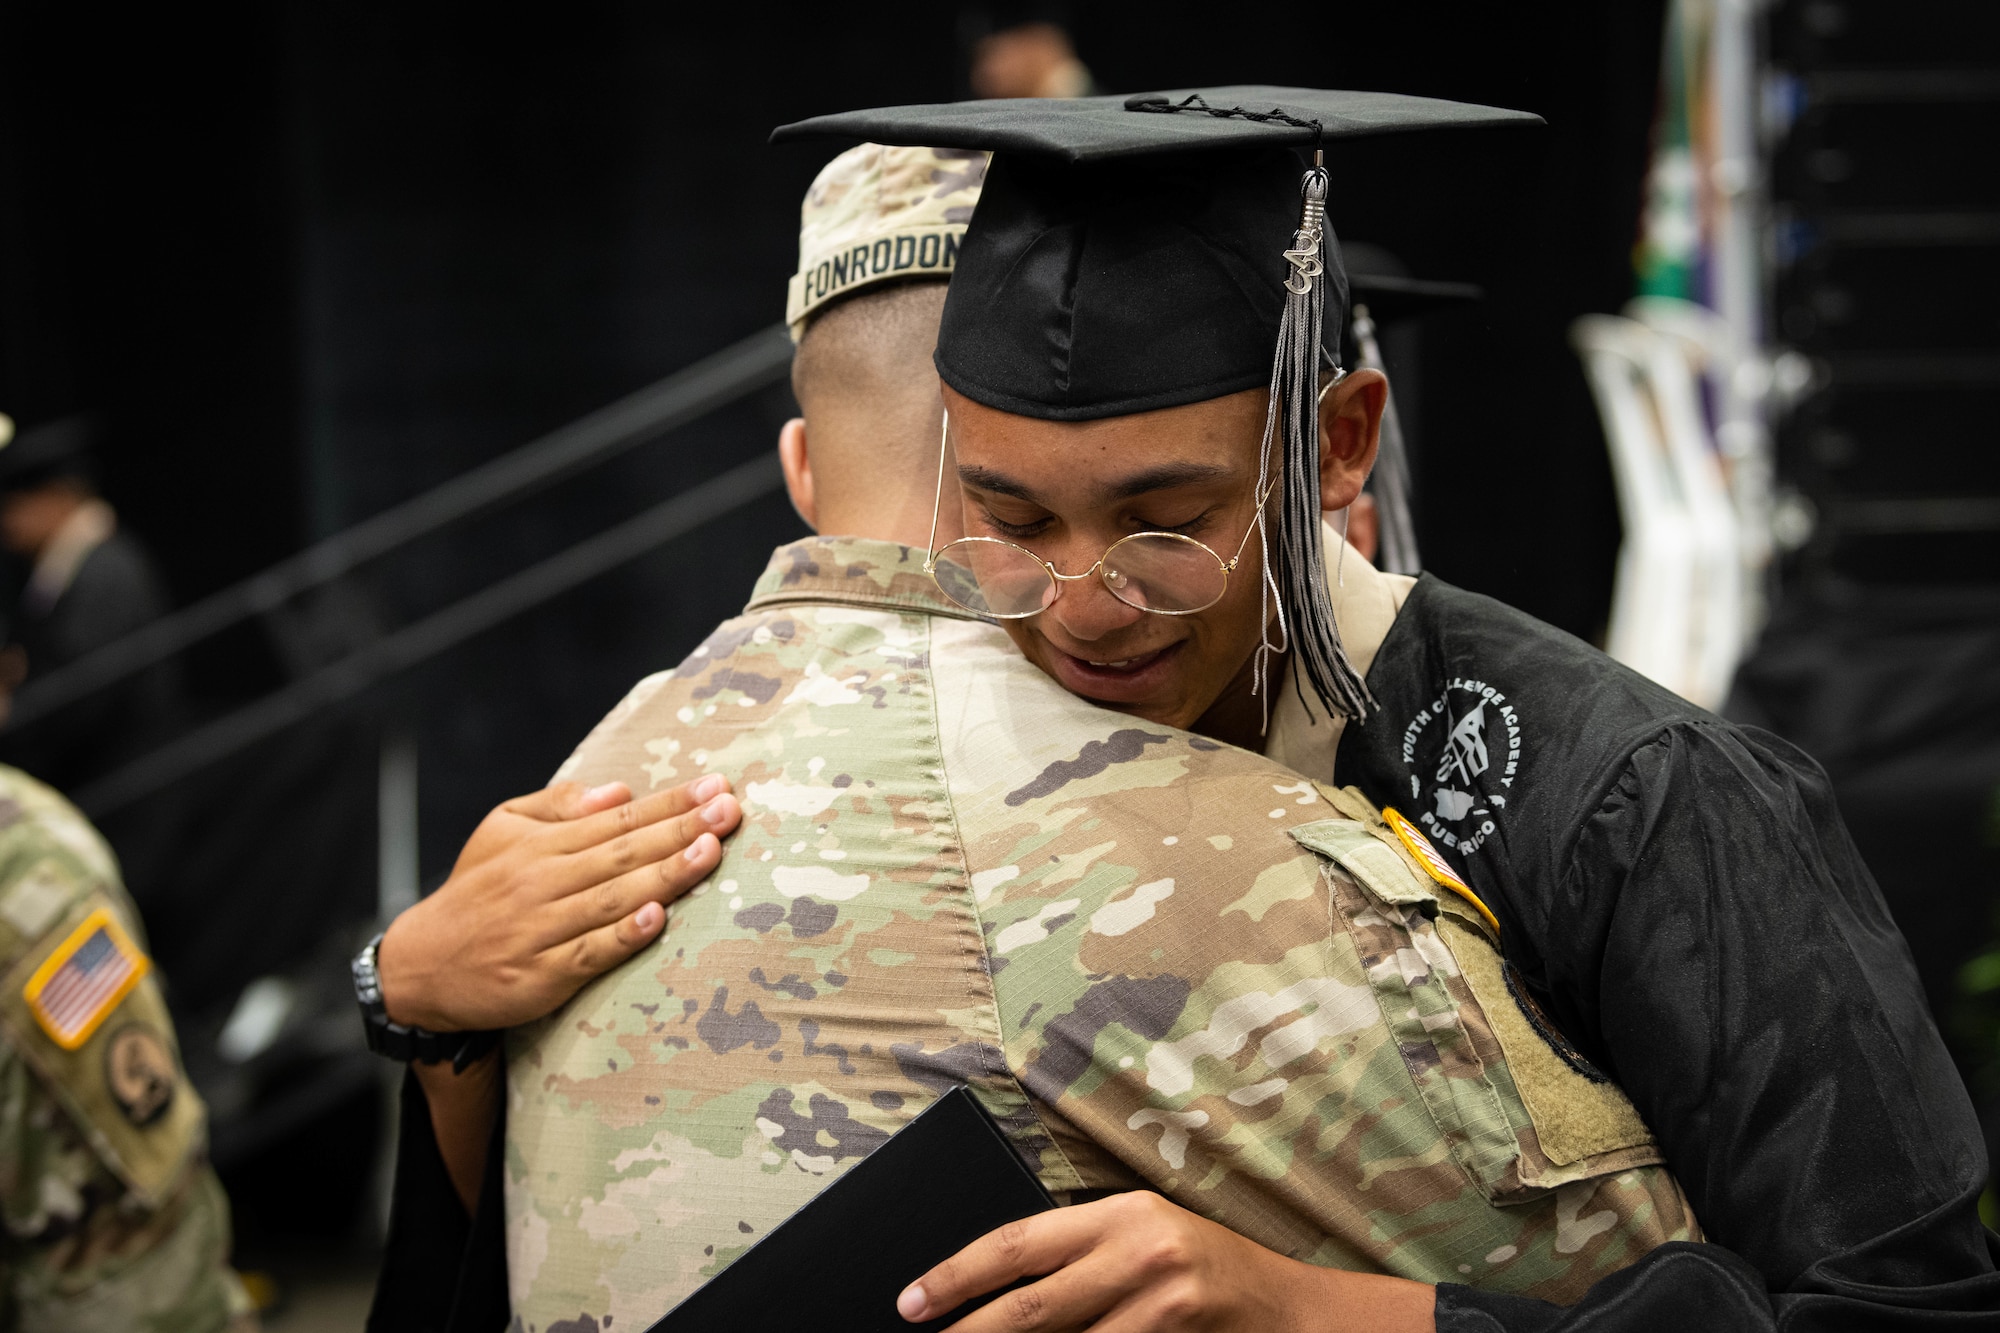 Cadet Jan Lopez with the Puerto Rico National Guard Youth ChalleNGe Academy, 3rd Platoon, Wolfpack, Class 23-02, hugs U.S. Army Staff Sgt. Axel I. Fonrodona, a cadre with the PRNG Youth ChalleNGe Academy, after receiving his graduation diploma during his class graduation ceremony at Pontifical Catholic University of Puerto Rico, Ponce, Puerto Rico, Sept. 15, 2023. Lopez received his high school diploma after completing the 22-week PRNG Youth ChalleNGe Academy program, where he studied for his high school diploma and also received vocational education from several career fields. (U.S. Air National Guard photo by 2nd. Lt. Eliezer Soto)